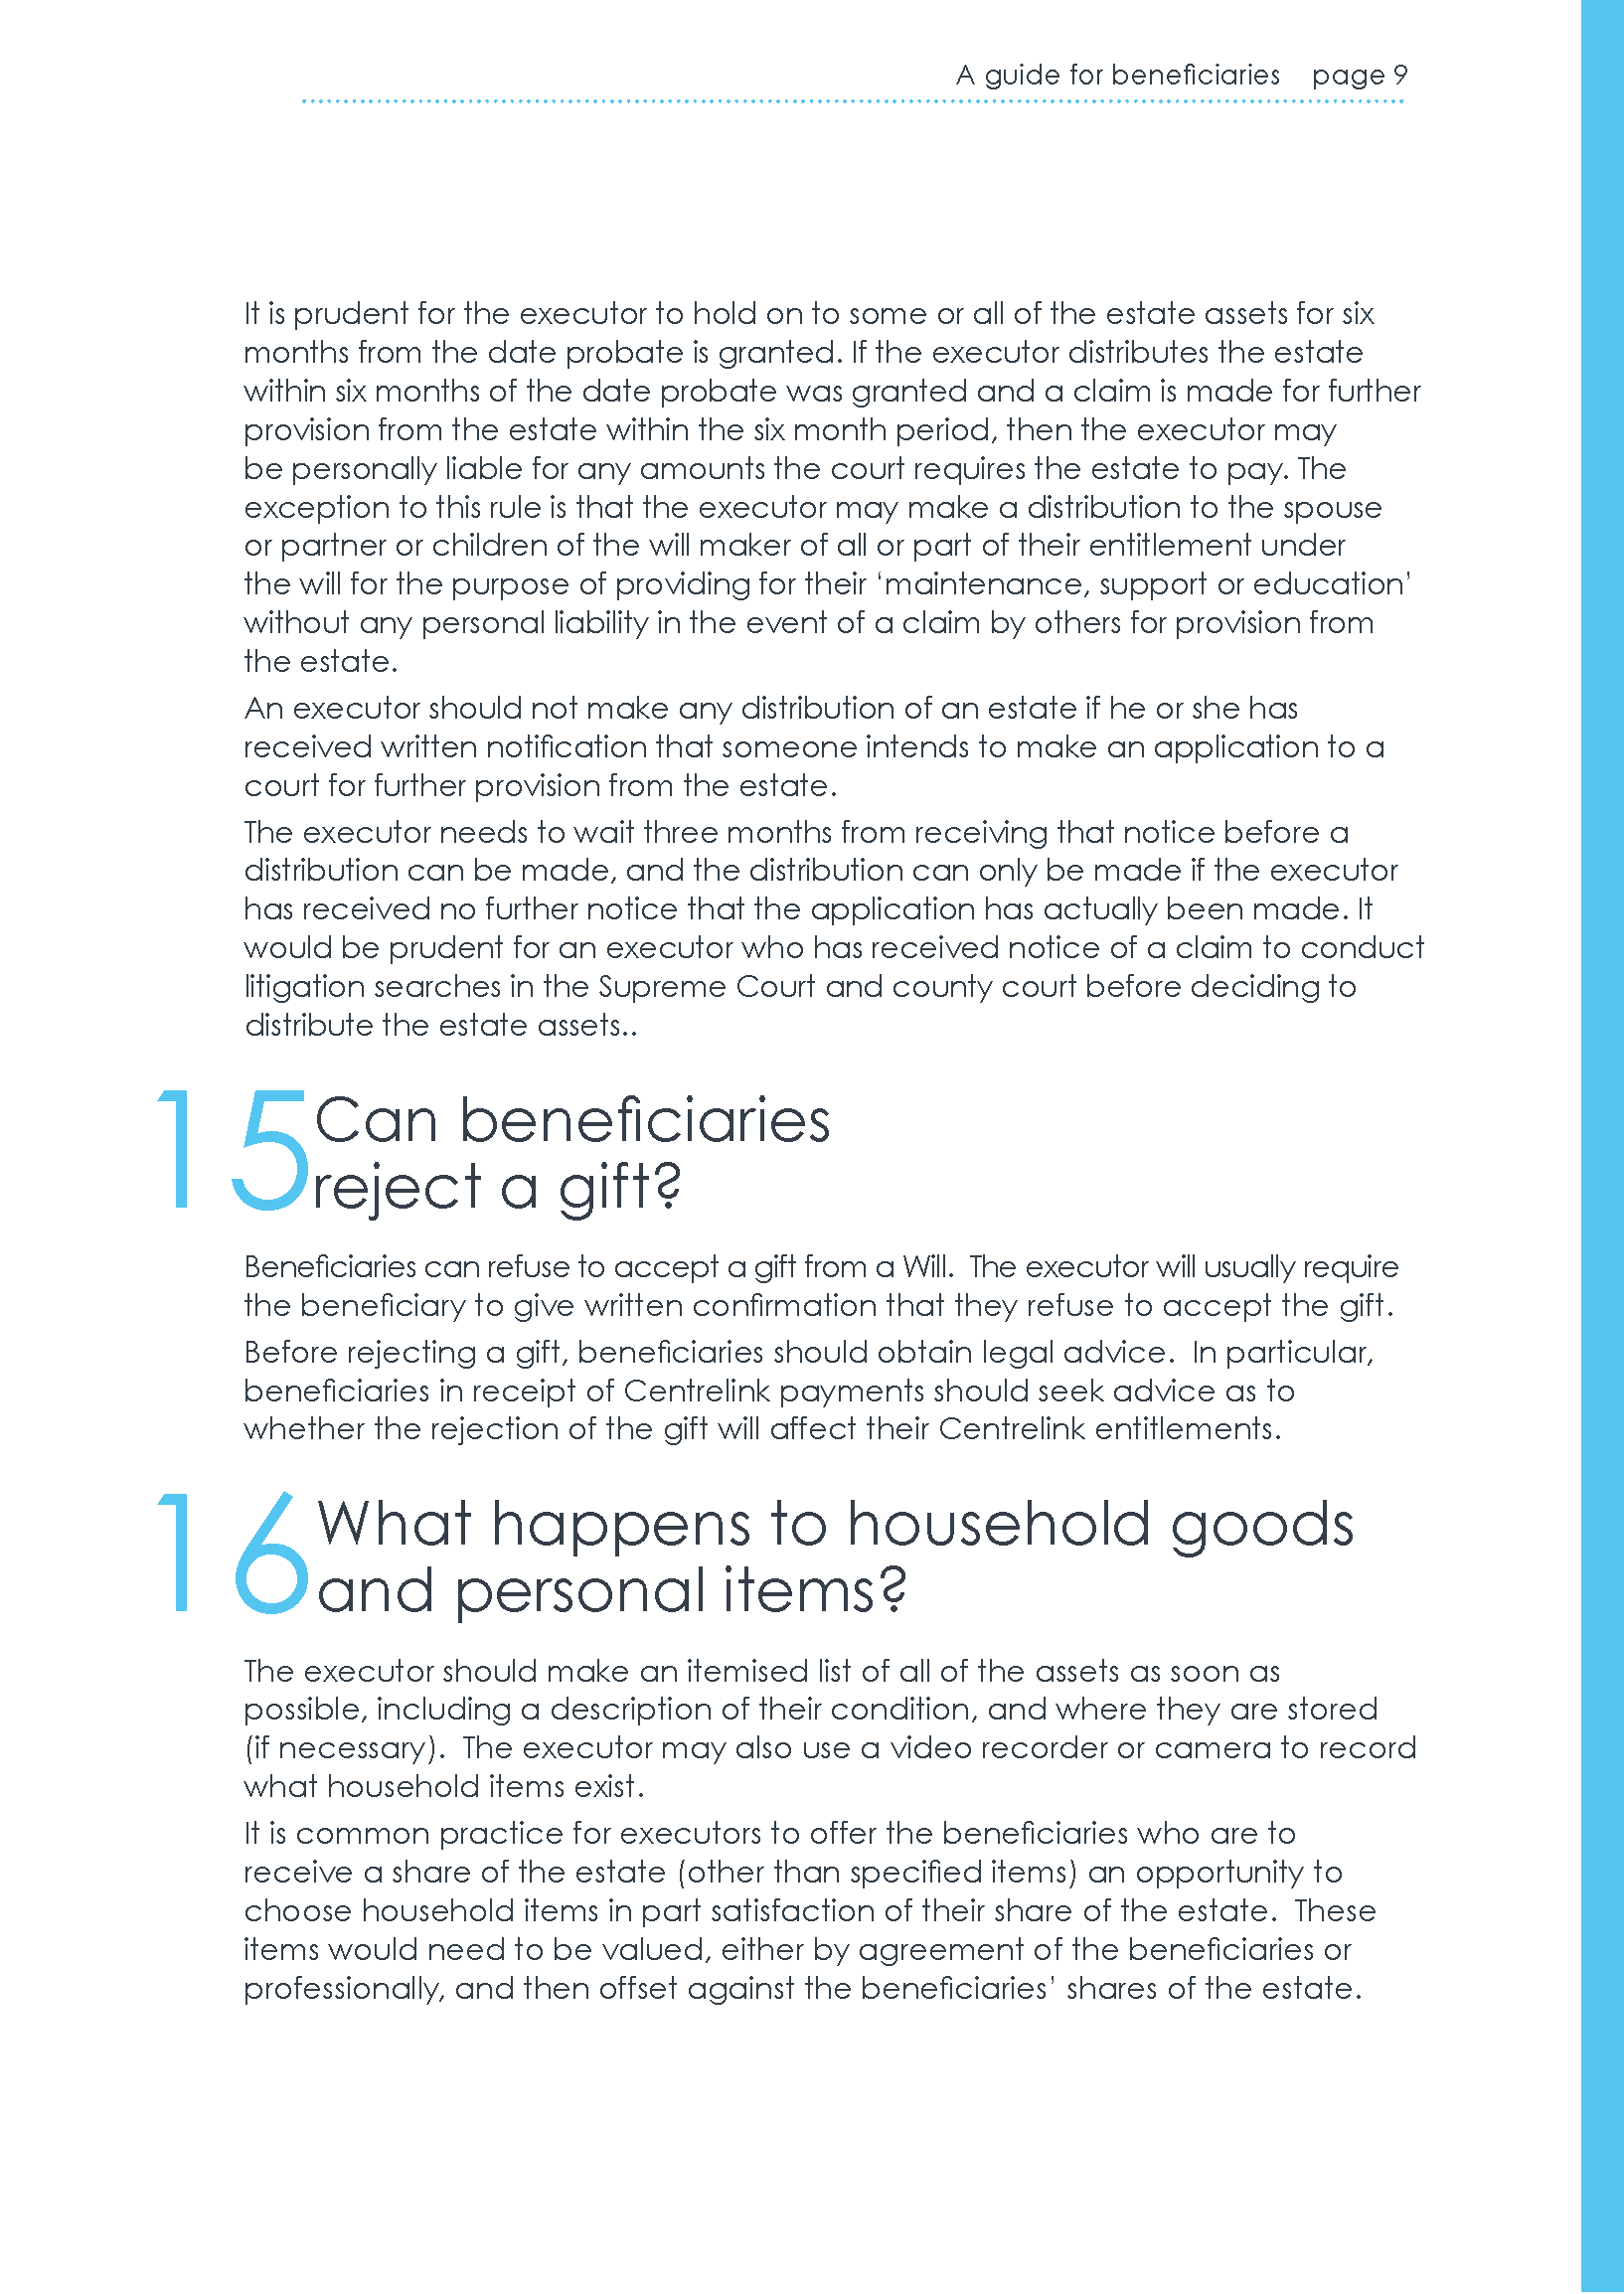 A-Guide-for-Beneficiaries-min_Page_11.png